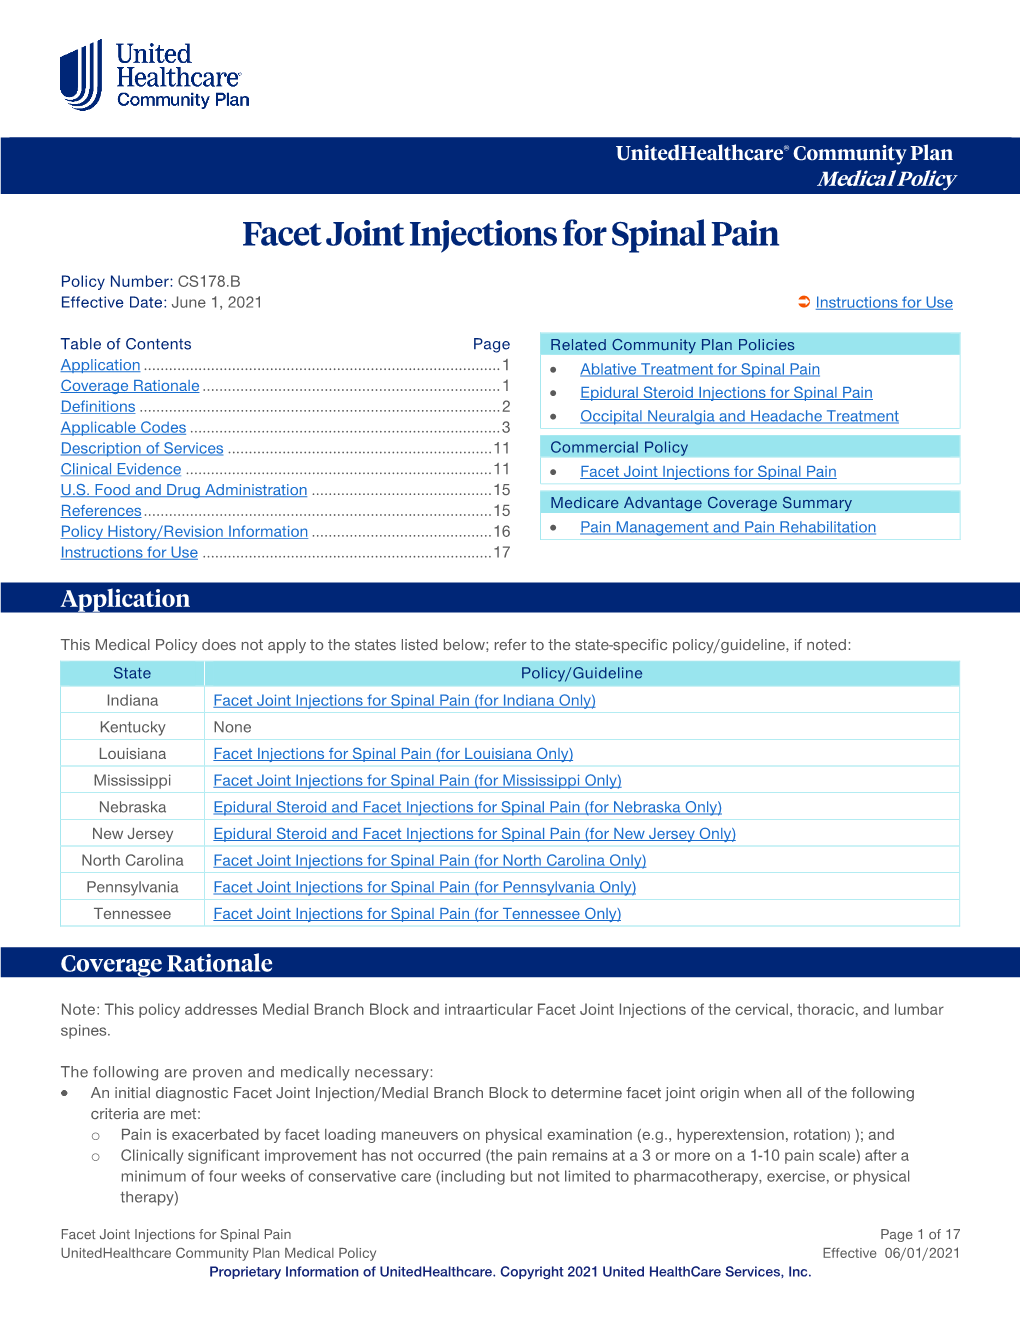 Facet Joint Injections for Spinal Pain